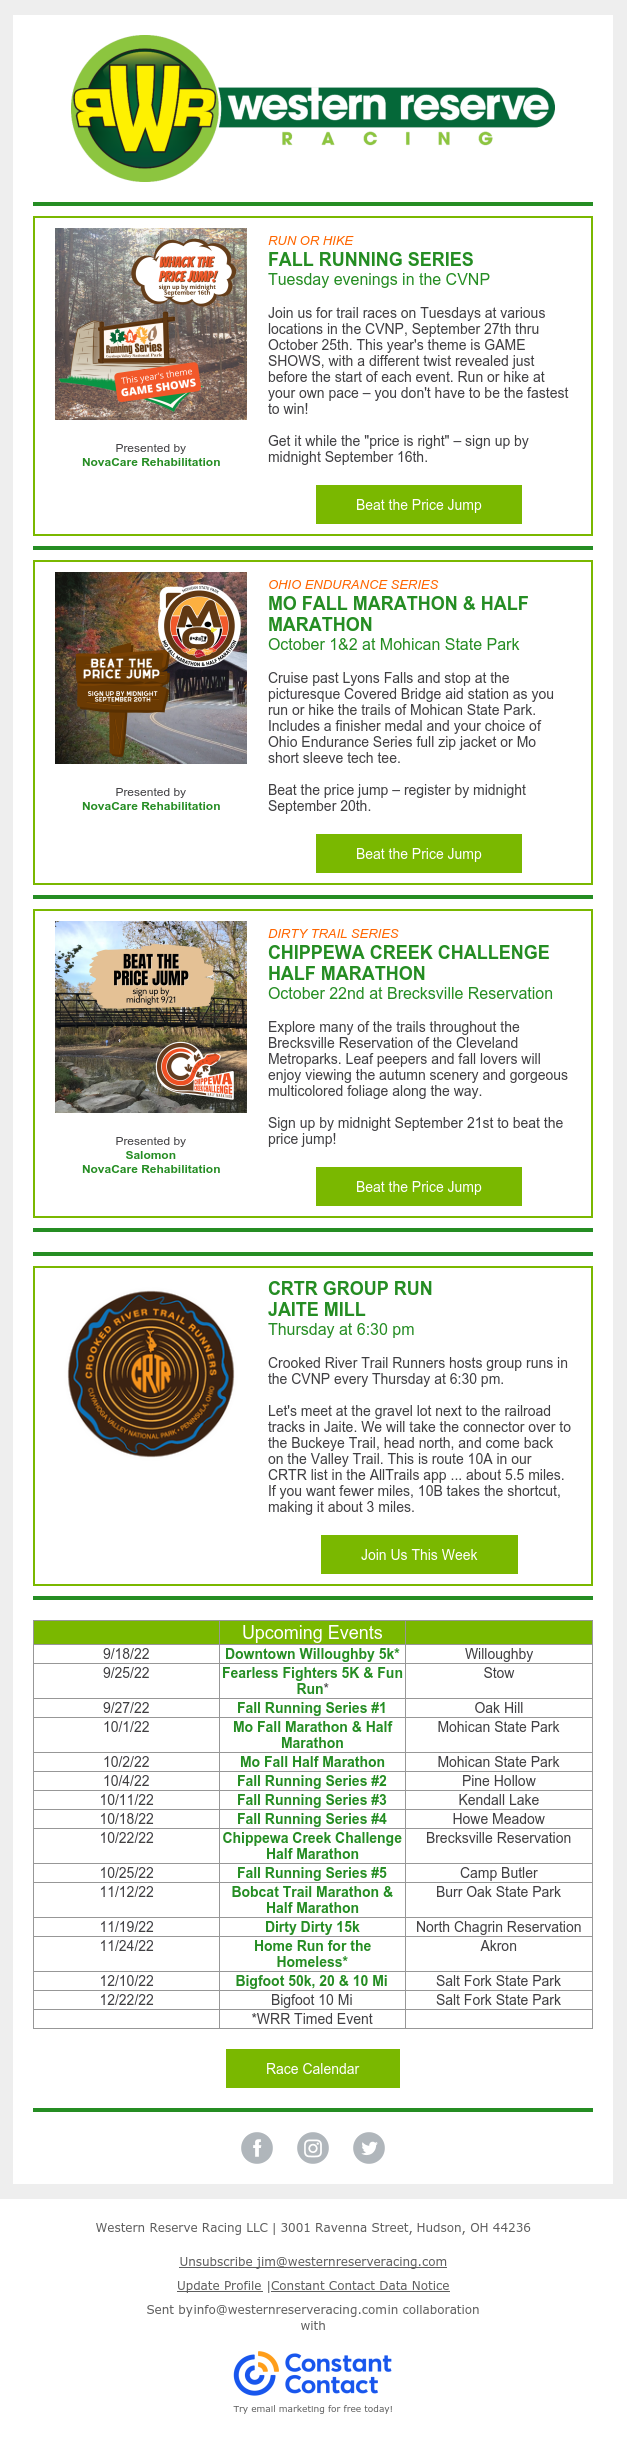 Don't be a Chump - Beat the Price Jumps! Fall Running Series, Mo Fall Marathon, and Chippewa Challenge